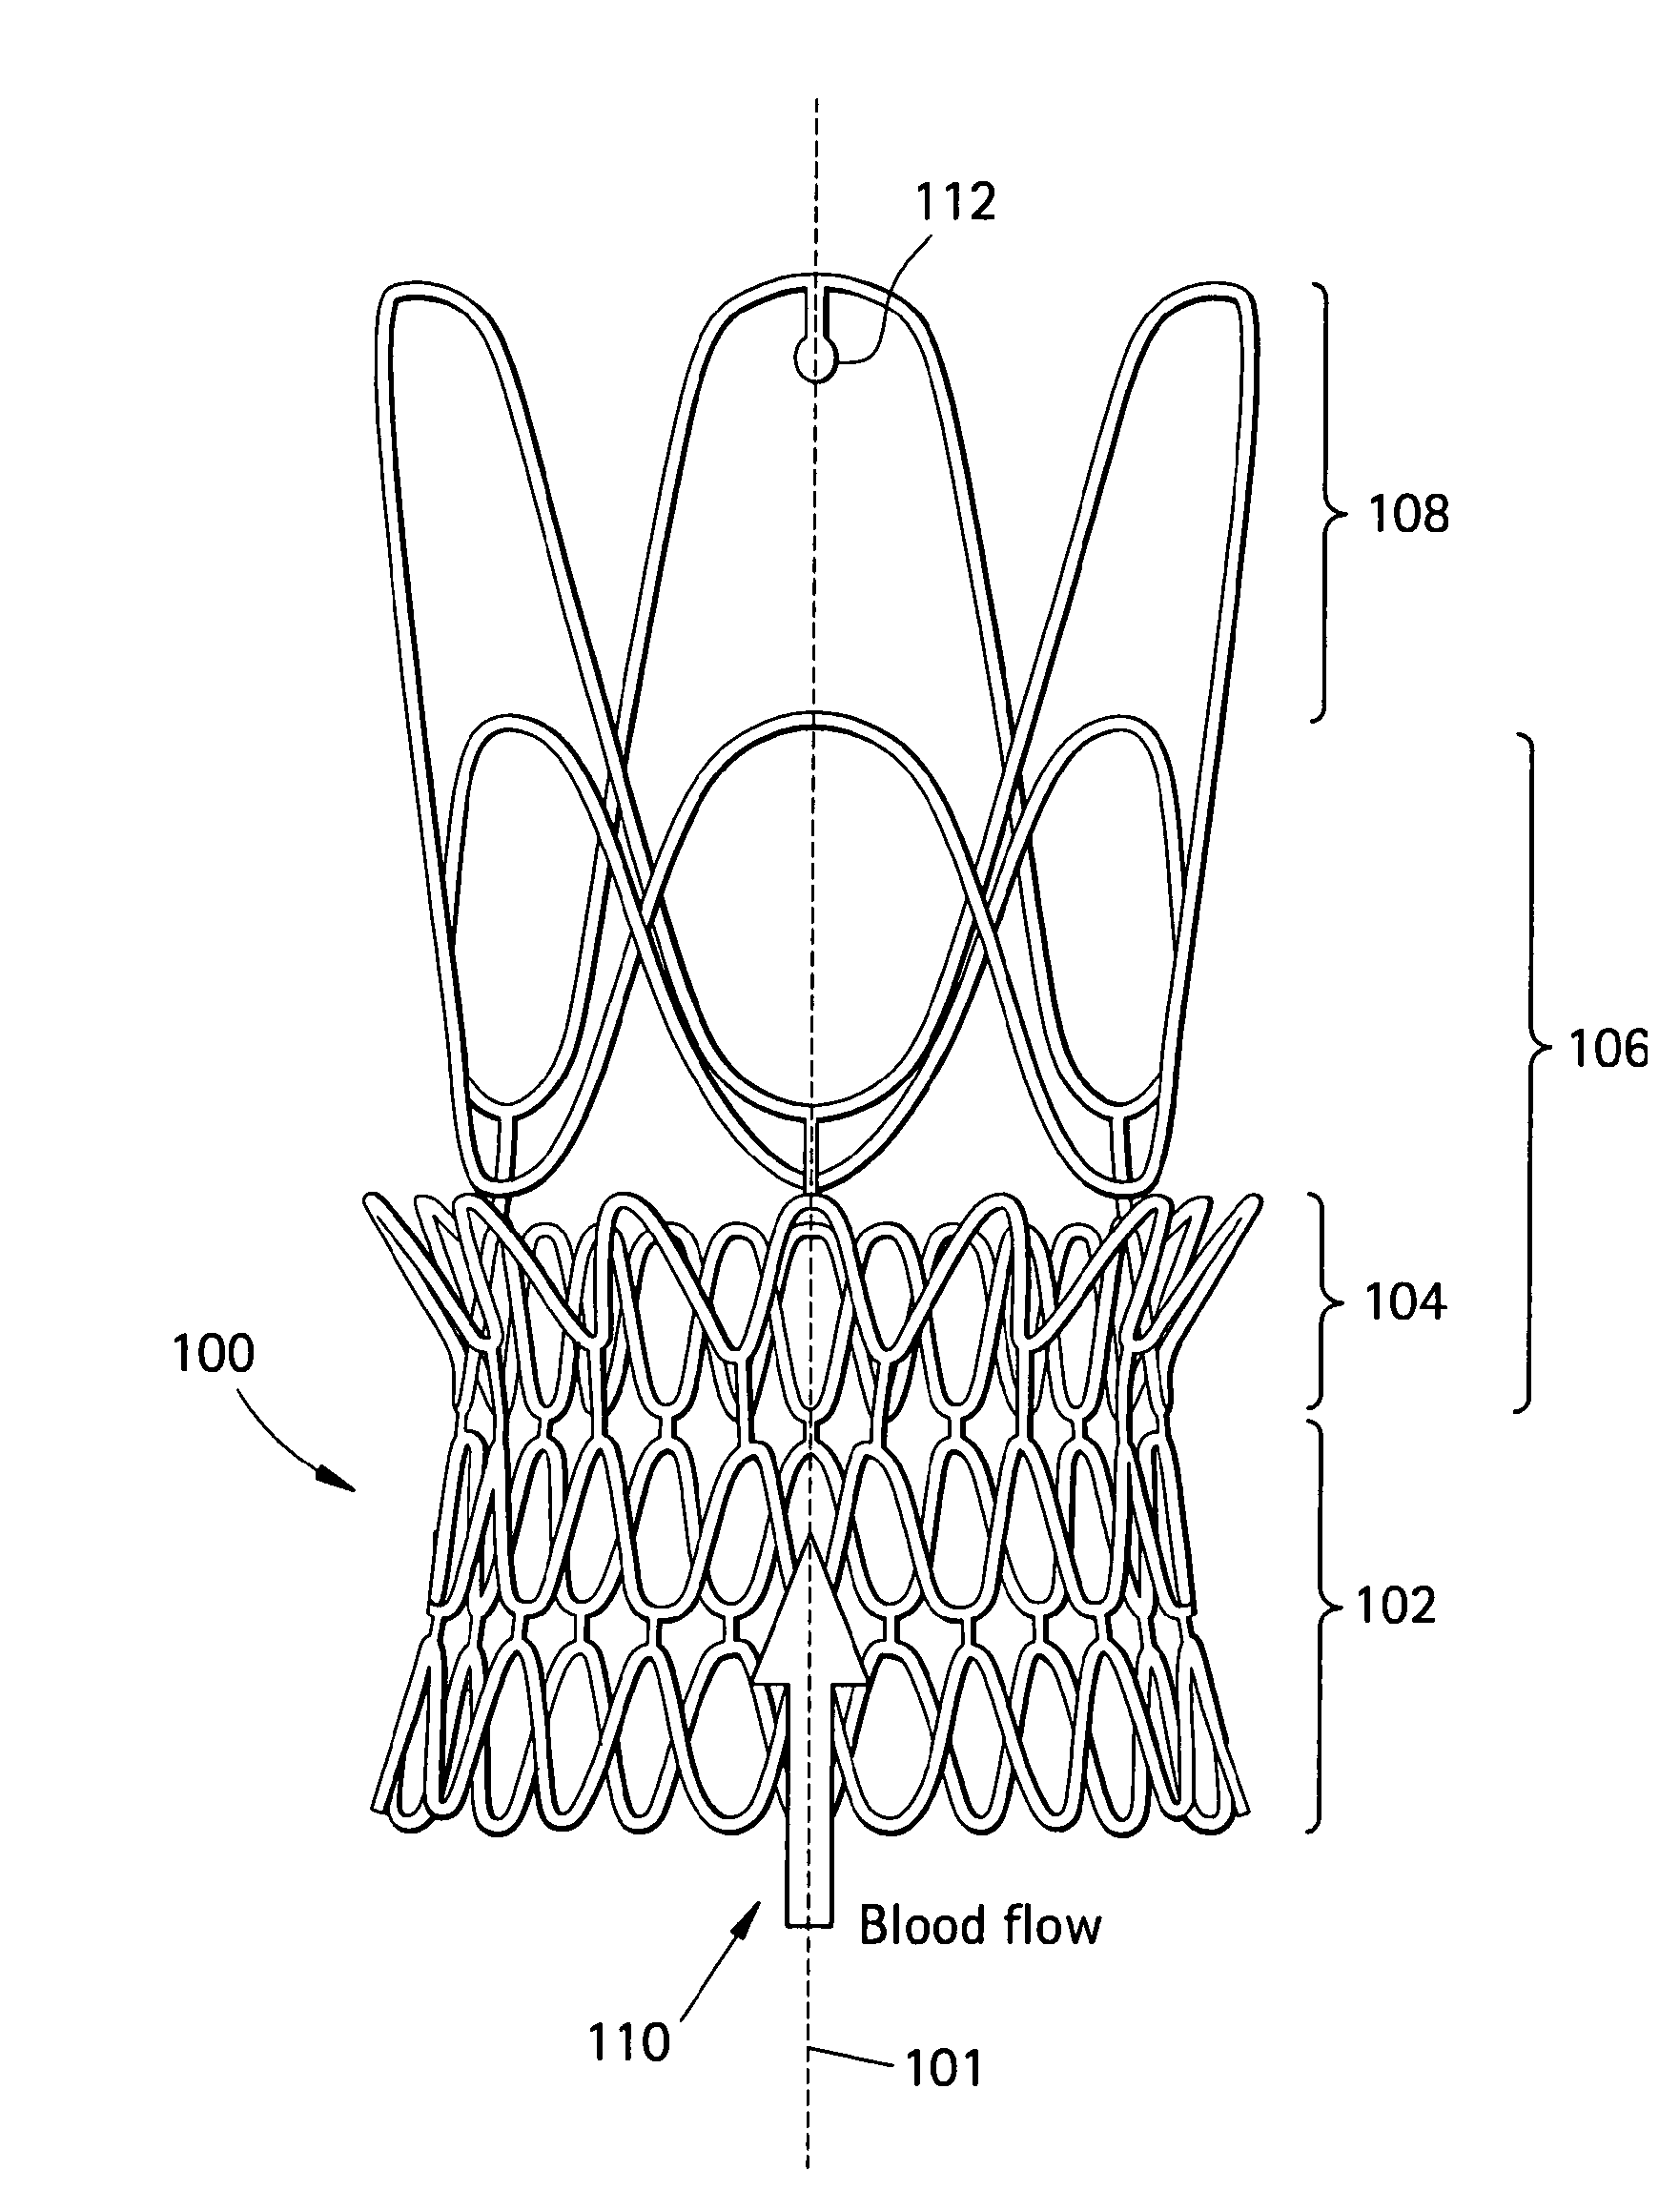 Stents, Valved-Stents, and Methods and Systems for Delivery Thereof